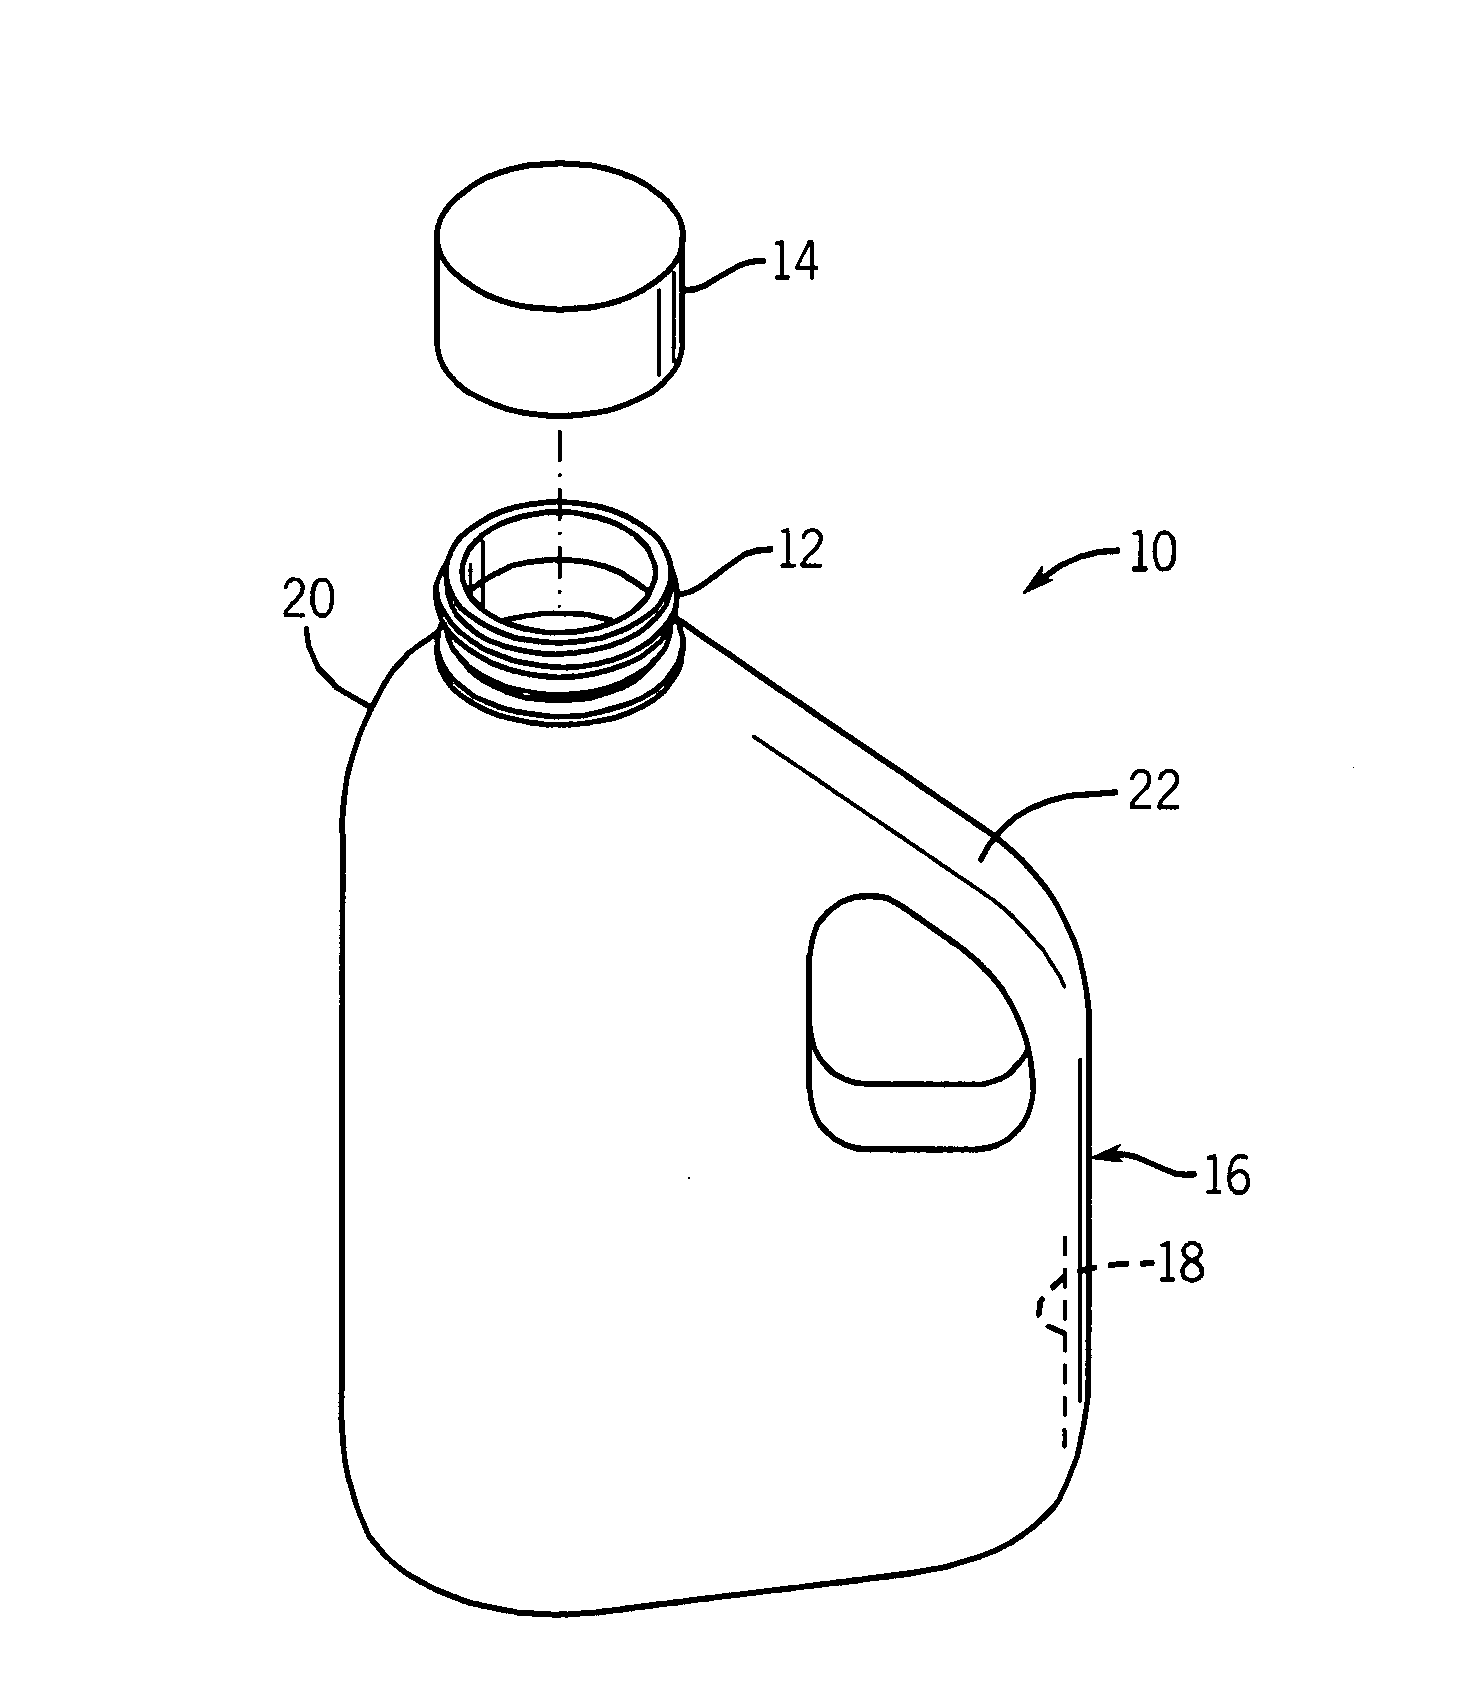 System and method for creating high gloss plastic items via the use of styrenic copolymers as a coextruded layer